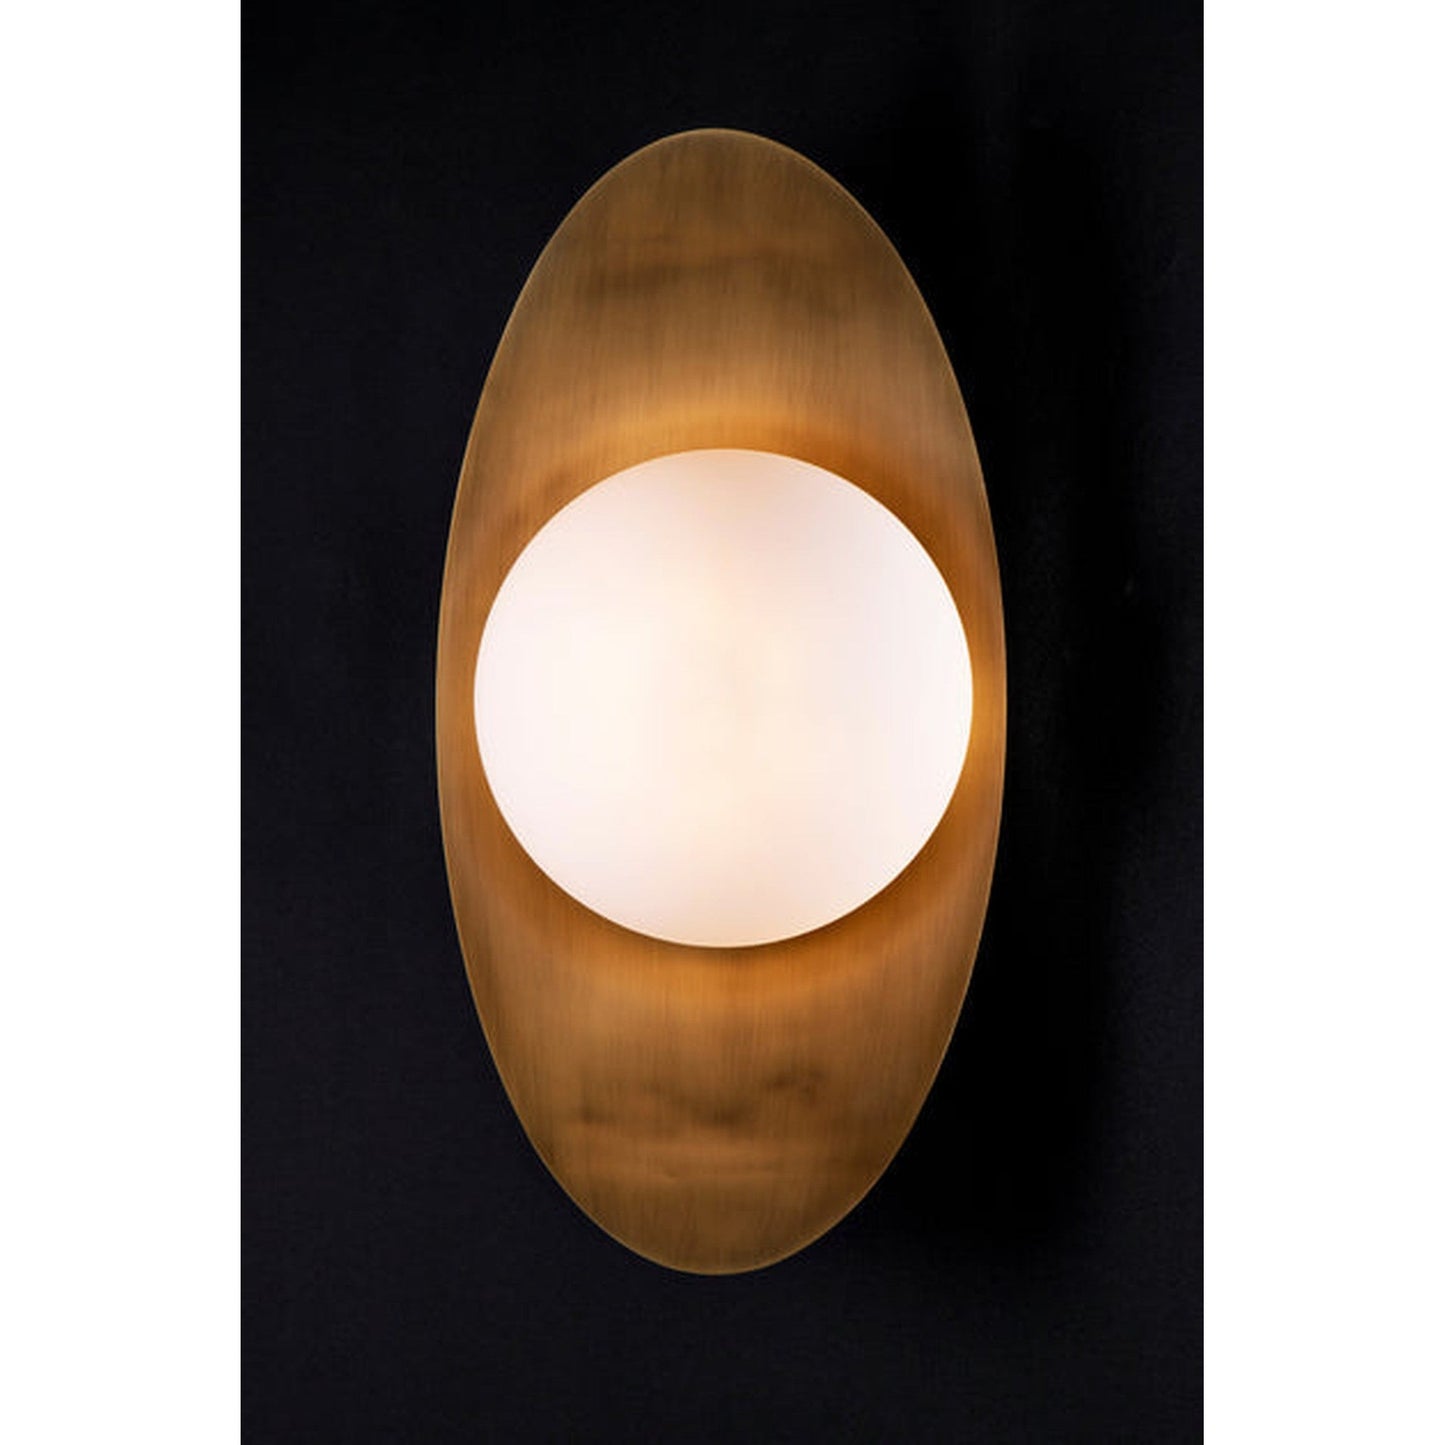 The Vault Mallen Leaf Wall Sconce